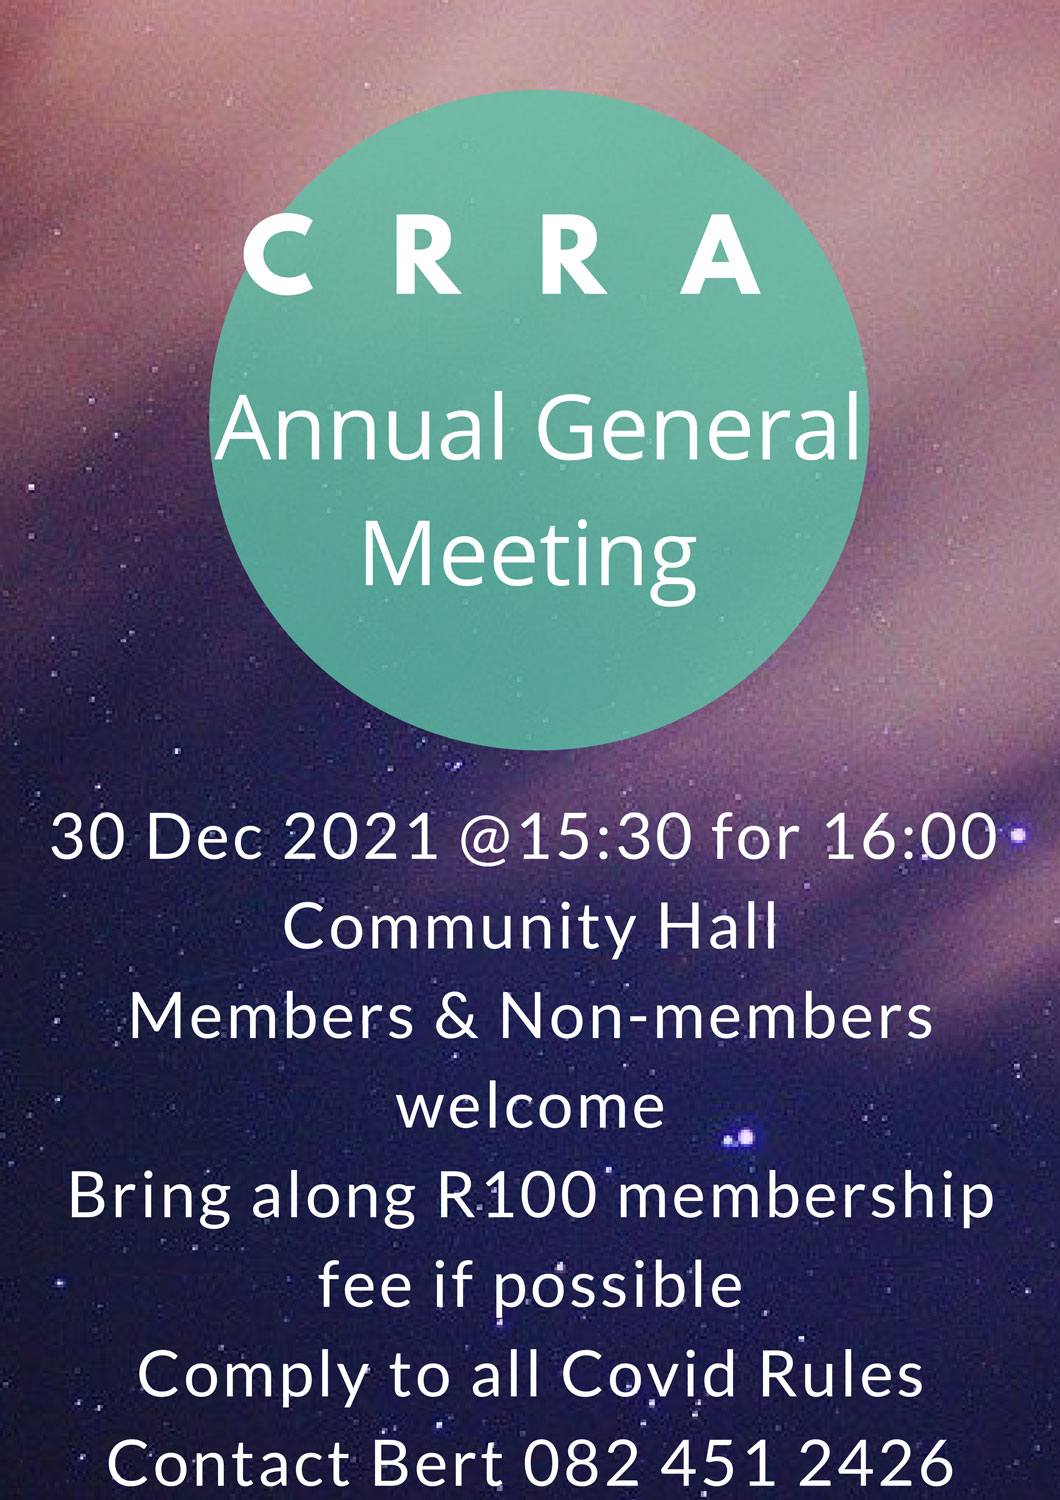 Cannon Rocks Rate Payers Association general meeting announcement poster with writing